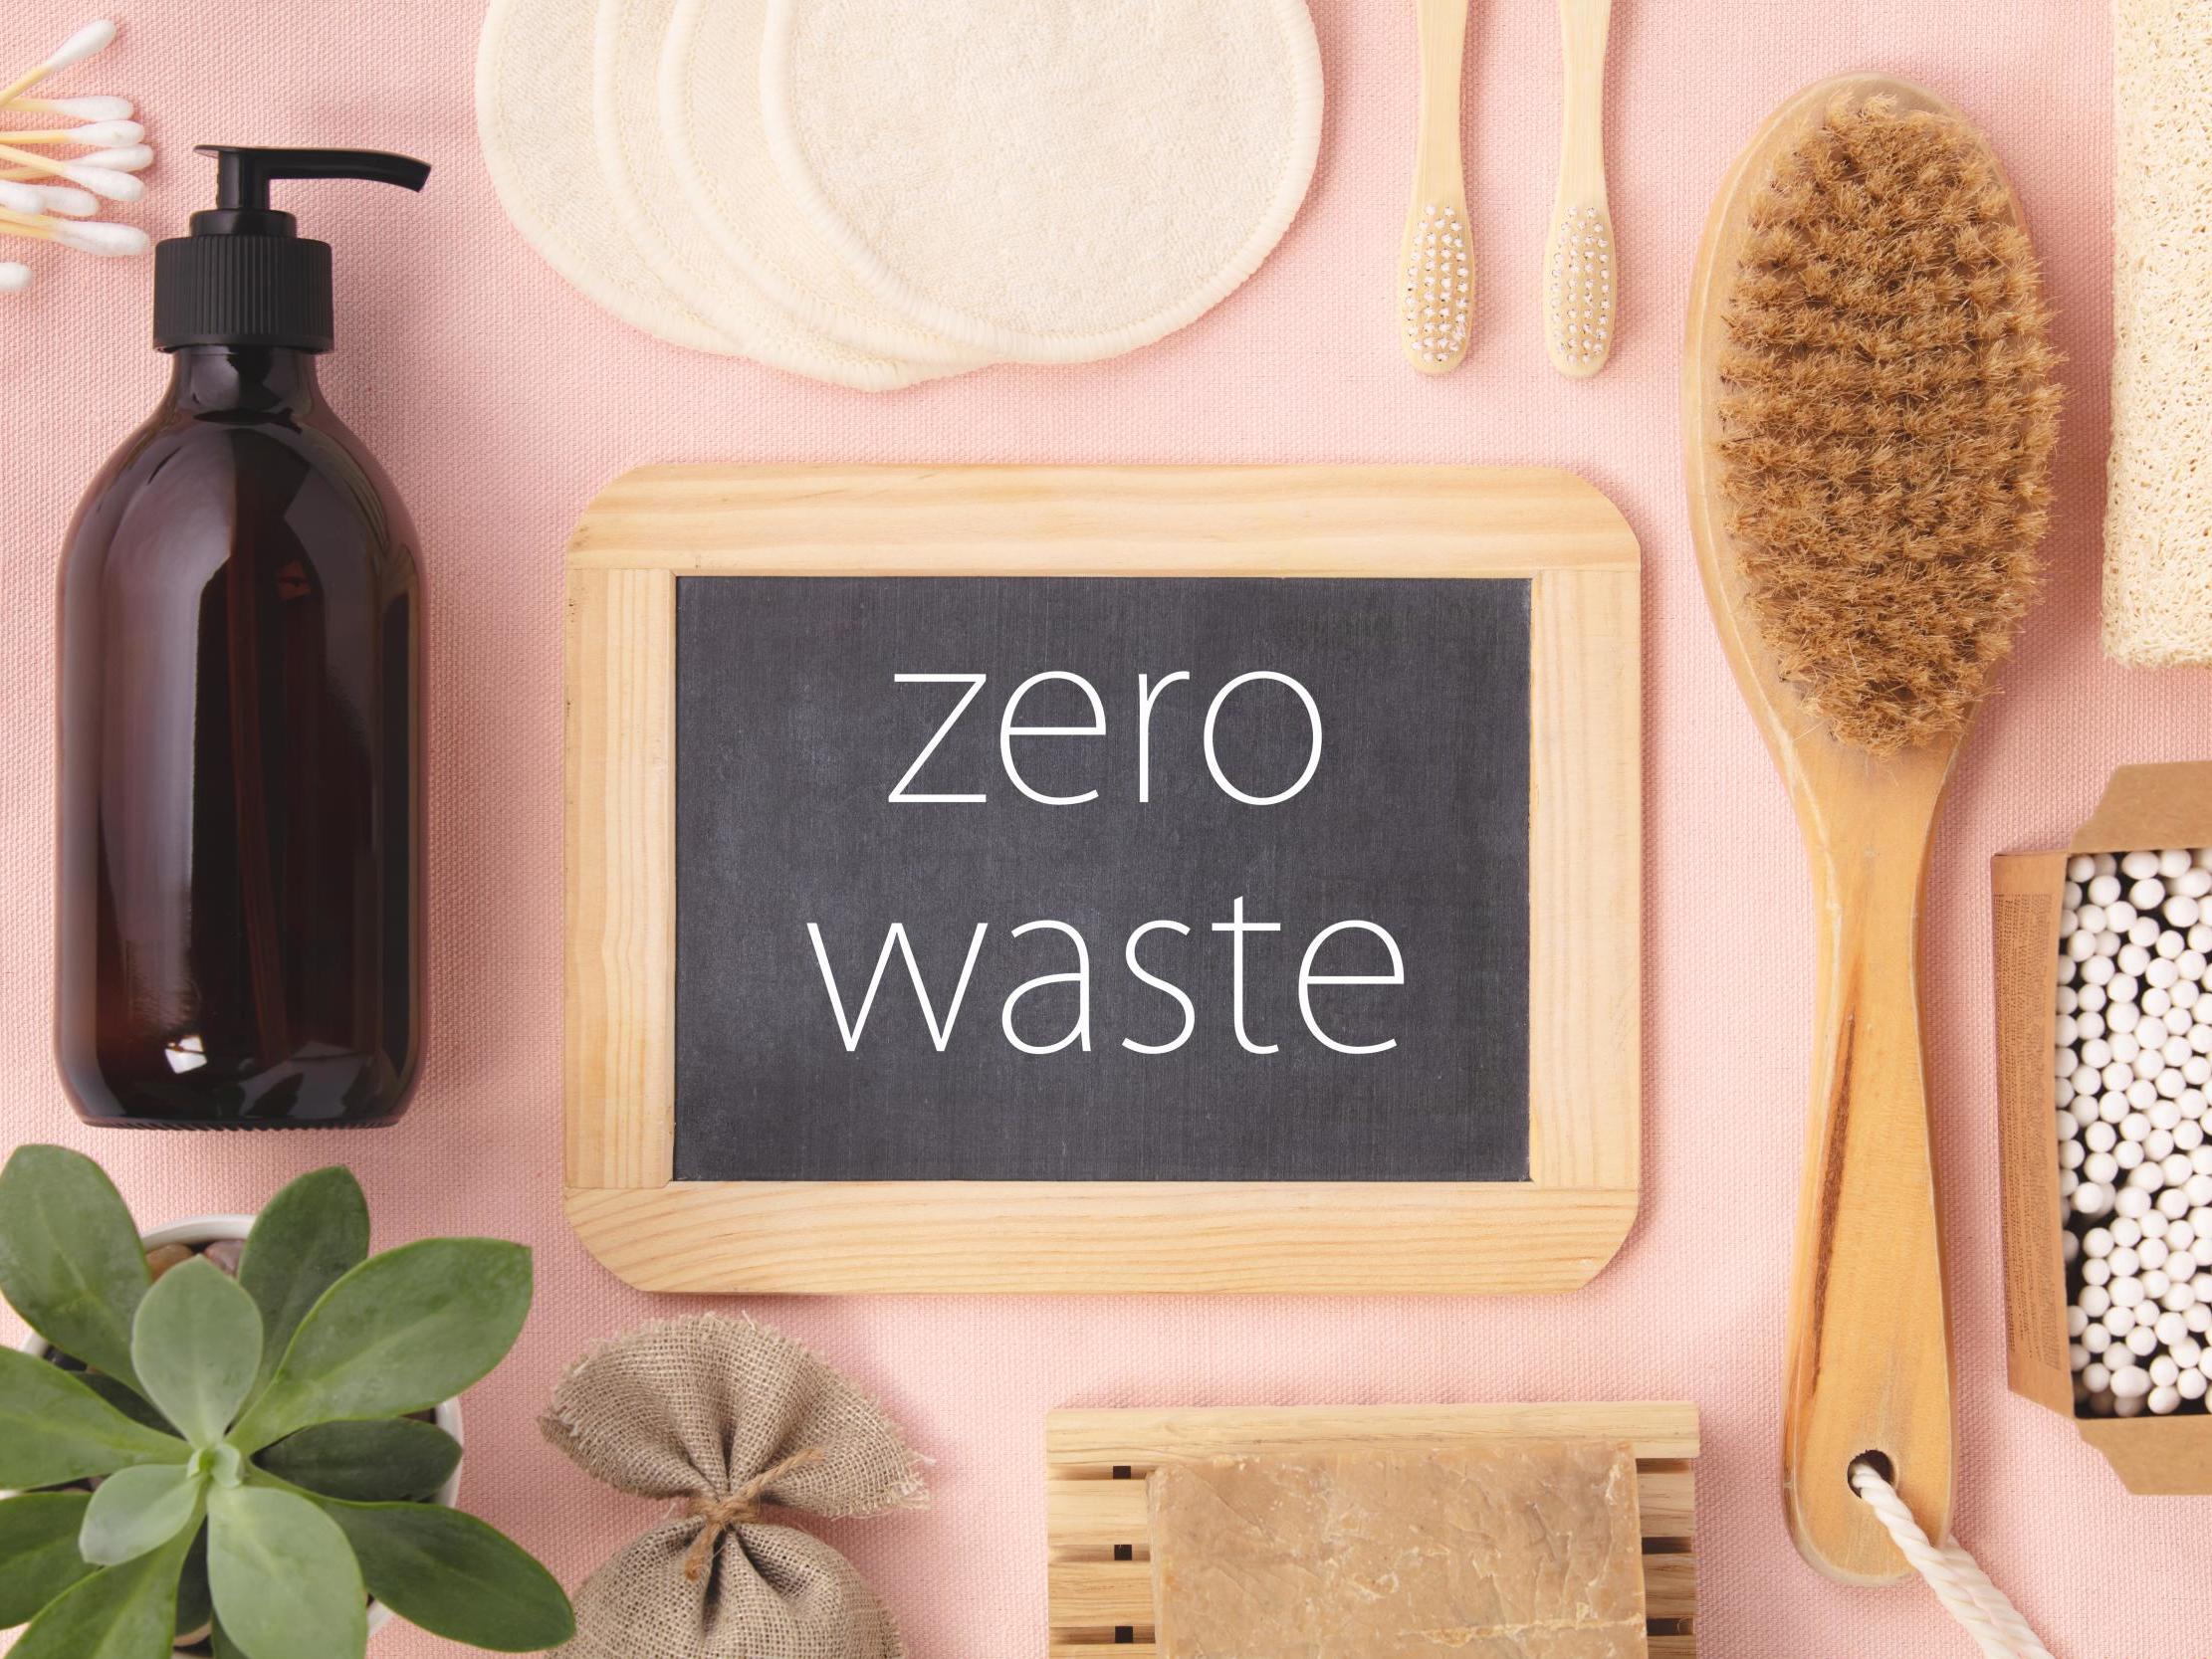 Zero-waste products are more important than ever in the battle for a greener planet